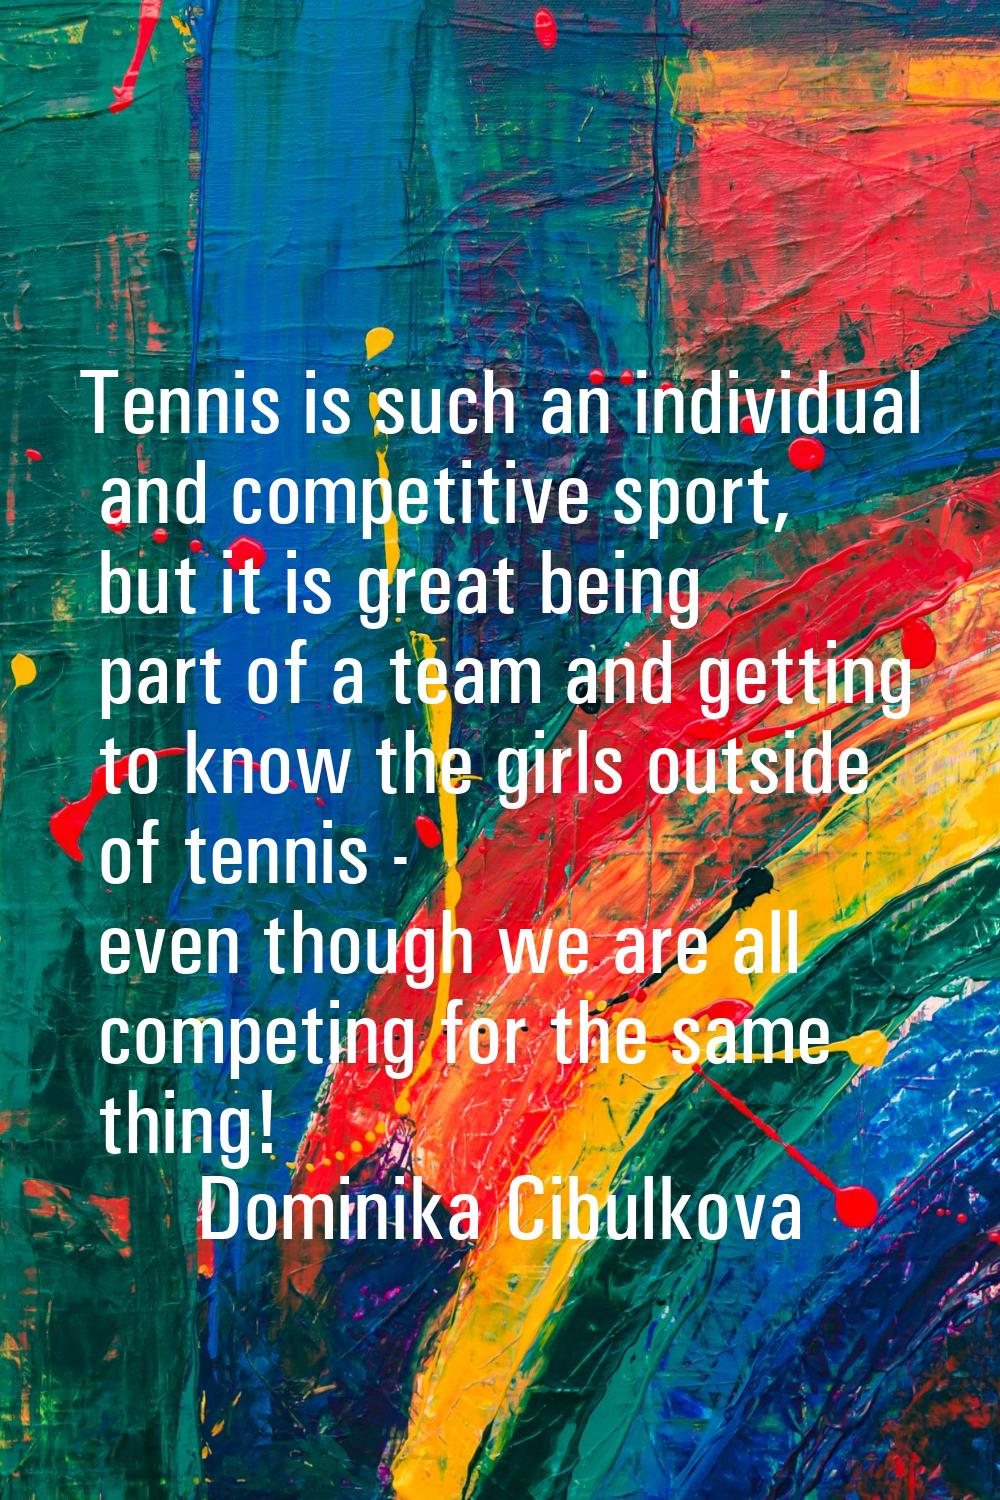 Tennis is such an individual and competitive sport, but it is great being part of a team and gettin